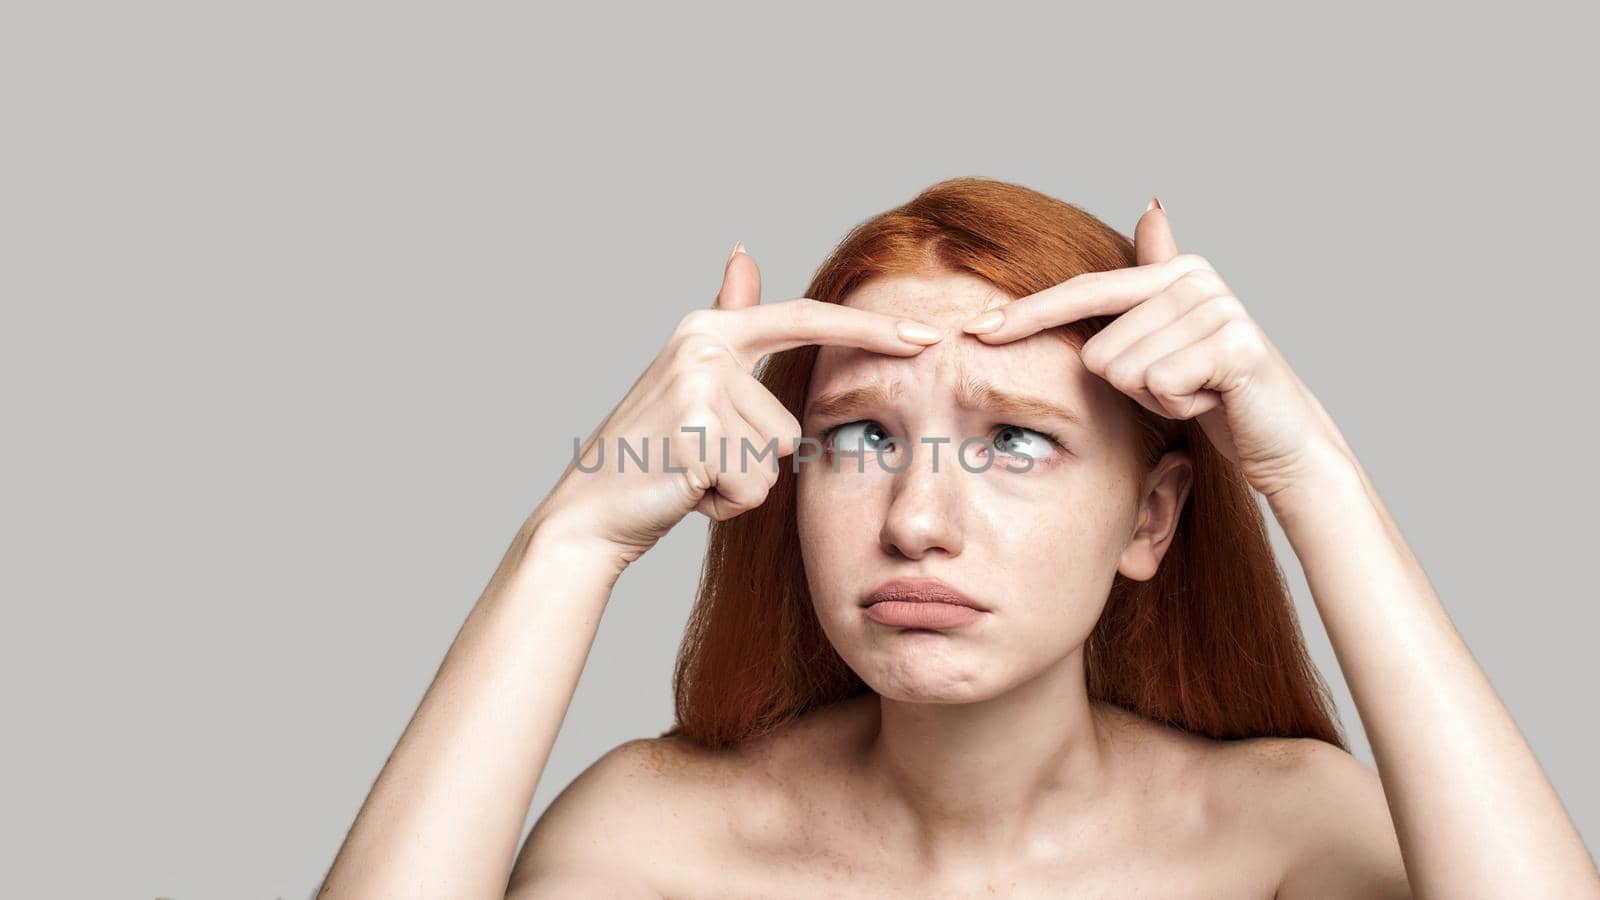 Studio shot of worried young redhead woman examining her face while standing against grey background. Skin care